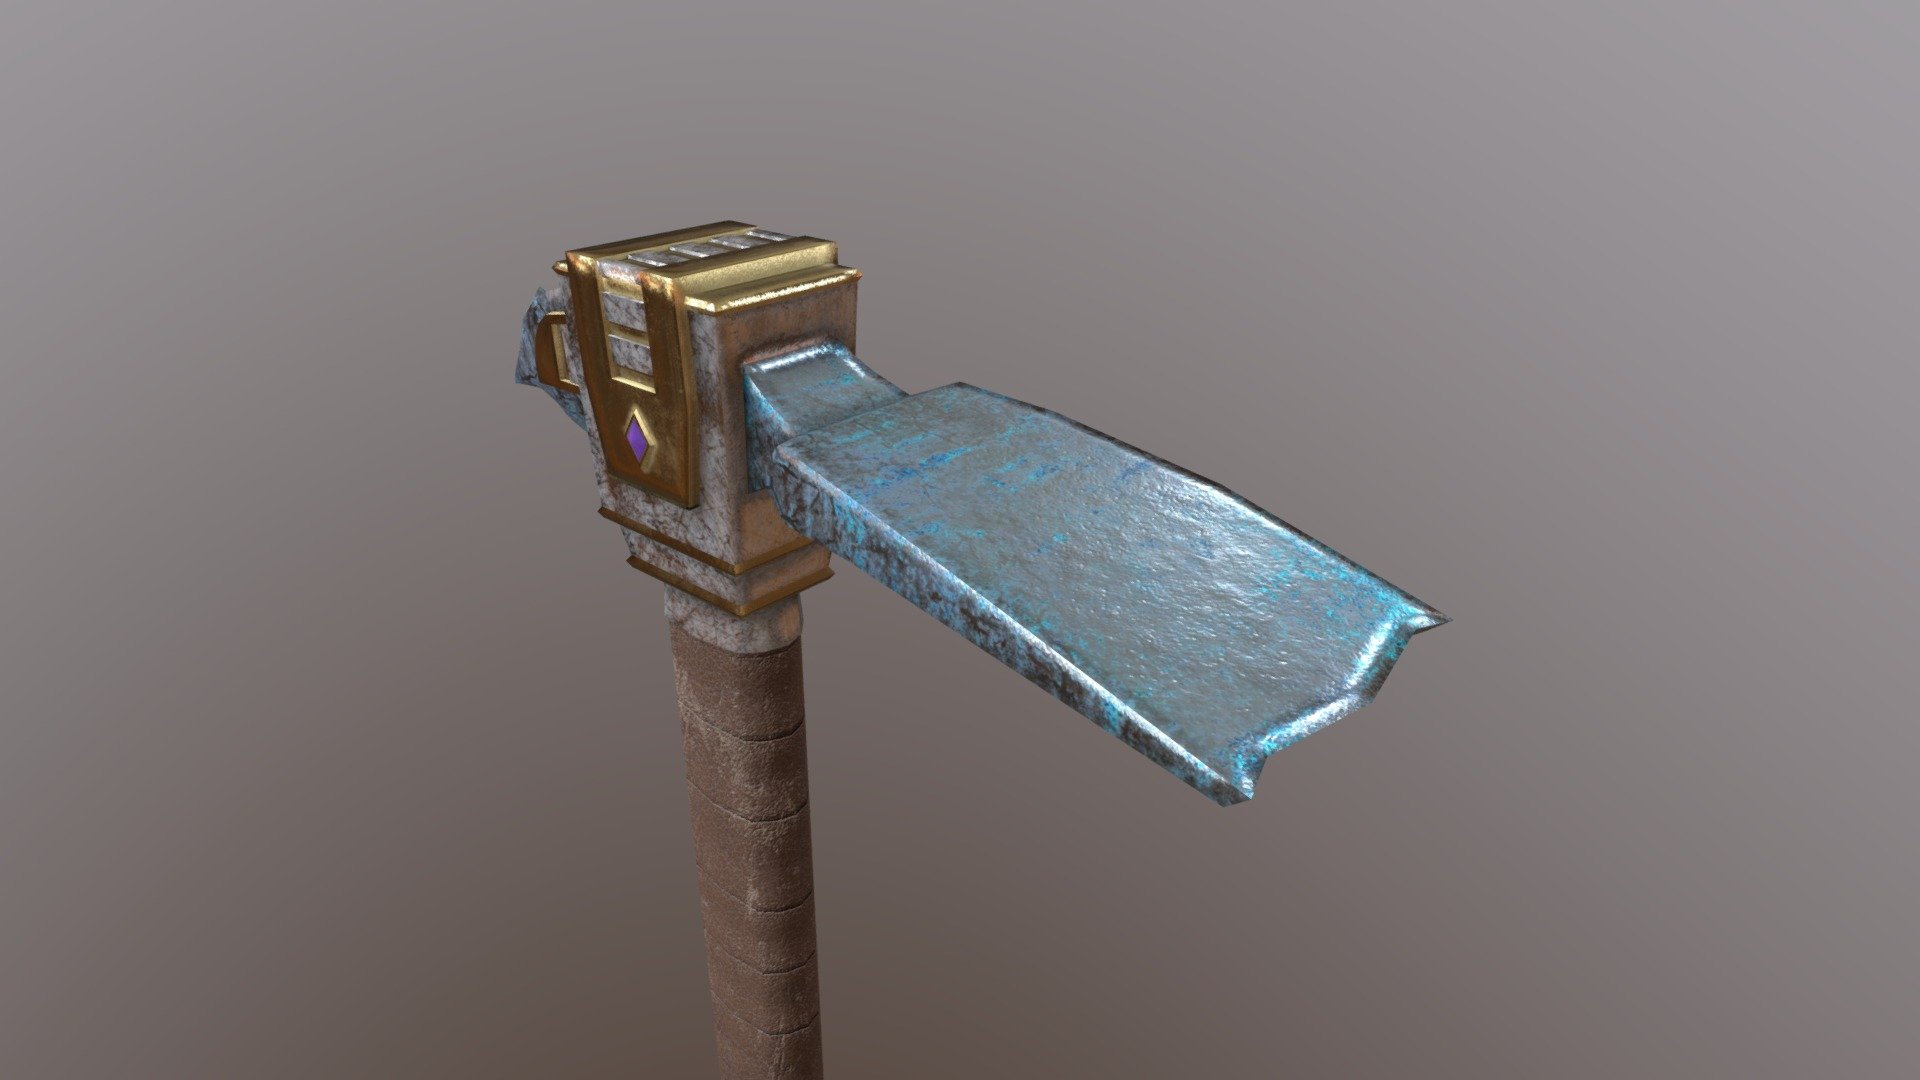 Enhance your best survival/crafting projects (game, render, advertising, design visualization, VR/AR&hellip;) with this awesome Mithril Hoe !

Game-ready !

Low-poly but very high quality material for the best visual and performance. Ideal for VR/AR games !

PBR material ready-to-go optimized for multiple engines and rendering software (Unity, Unreal Engine, Crysoftware, Blender&hellip;)

Technical Details

-&gt; 1 High-detail mesh but very optimized in poly-count :




556 Vertices | 462 Faces | 855 Tris

Clean mesh, only planar quads and tris

Smoothing group, pivot point and Position/Rotation/Scale already set

Real-size object

-&gt; 1 PBR Material

-&gt; 4 Textures in 2k resolution :




Albedo/Diffuse/Color map

Metalic/Roughness map

Normal map

Ambient Occlusion map

-&gt; UV Map clean and no-overlapping.

-&gt; Modelized in Blender and textured in Substance Painter.

-&gt; Multiple file available : .blend, .fbx, .obj, .unitypackage.

For any more informations, don't hesitate to contact me ! - Hoe Mithril - Buy Royalty Free 3D model by Arigasoft 3d model